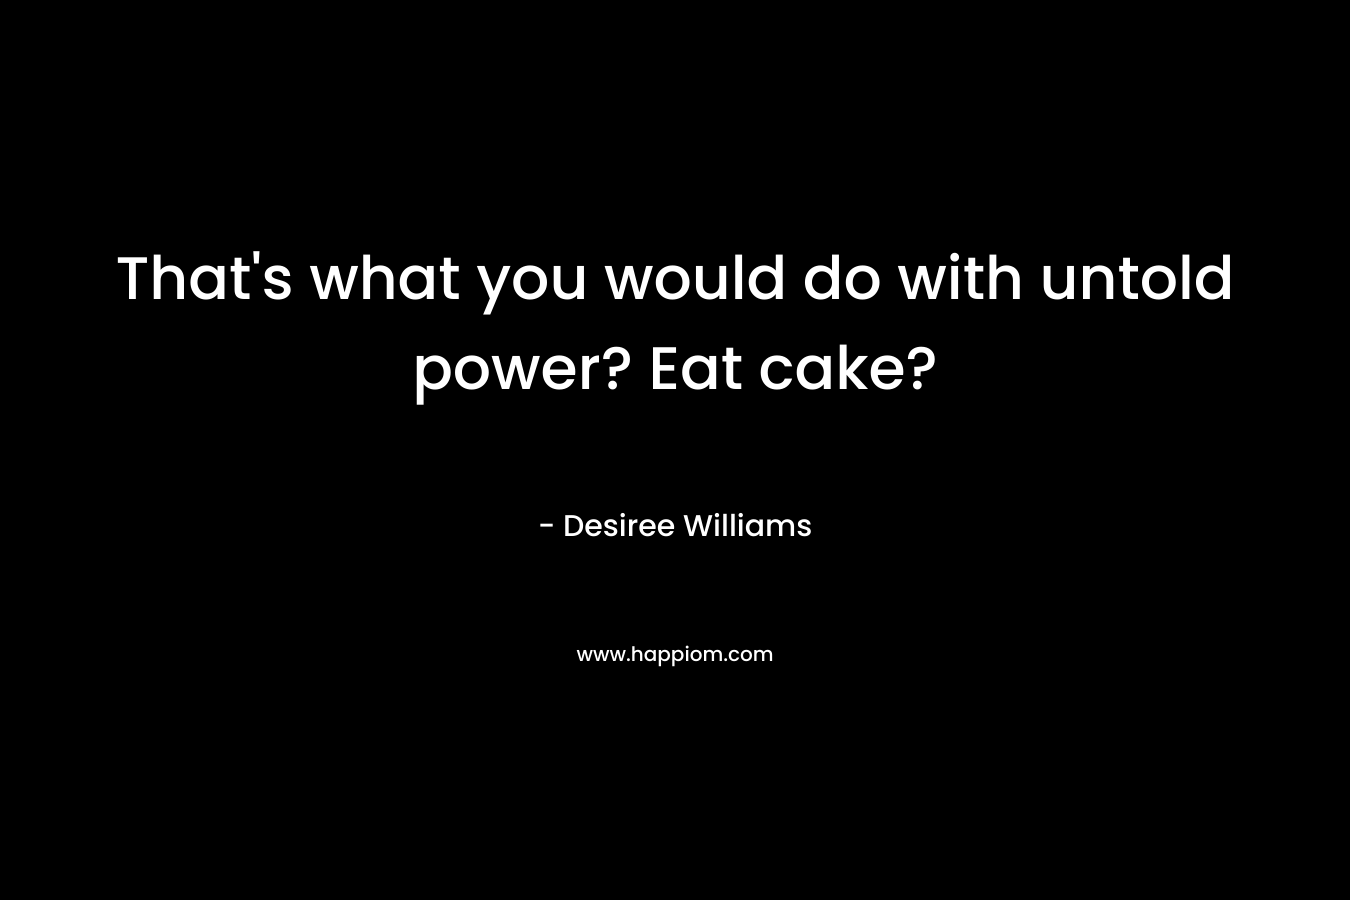 That's what you would do with untold power? Eat cake?